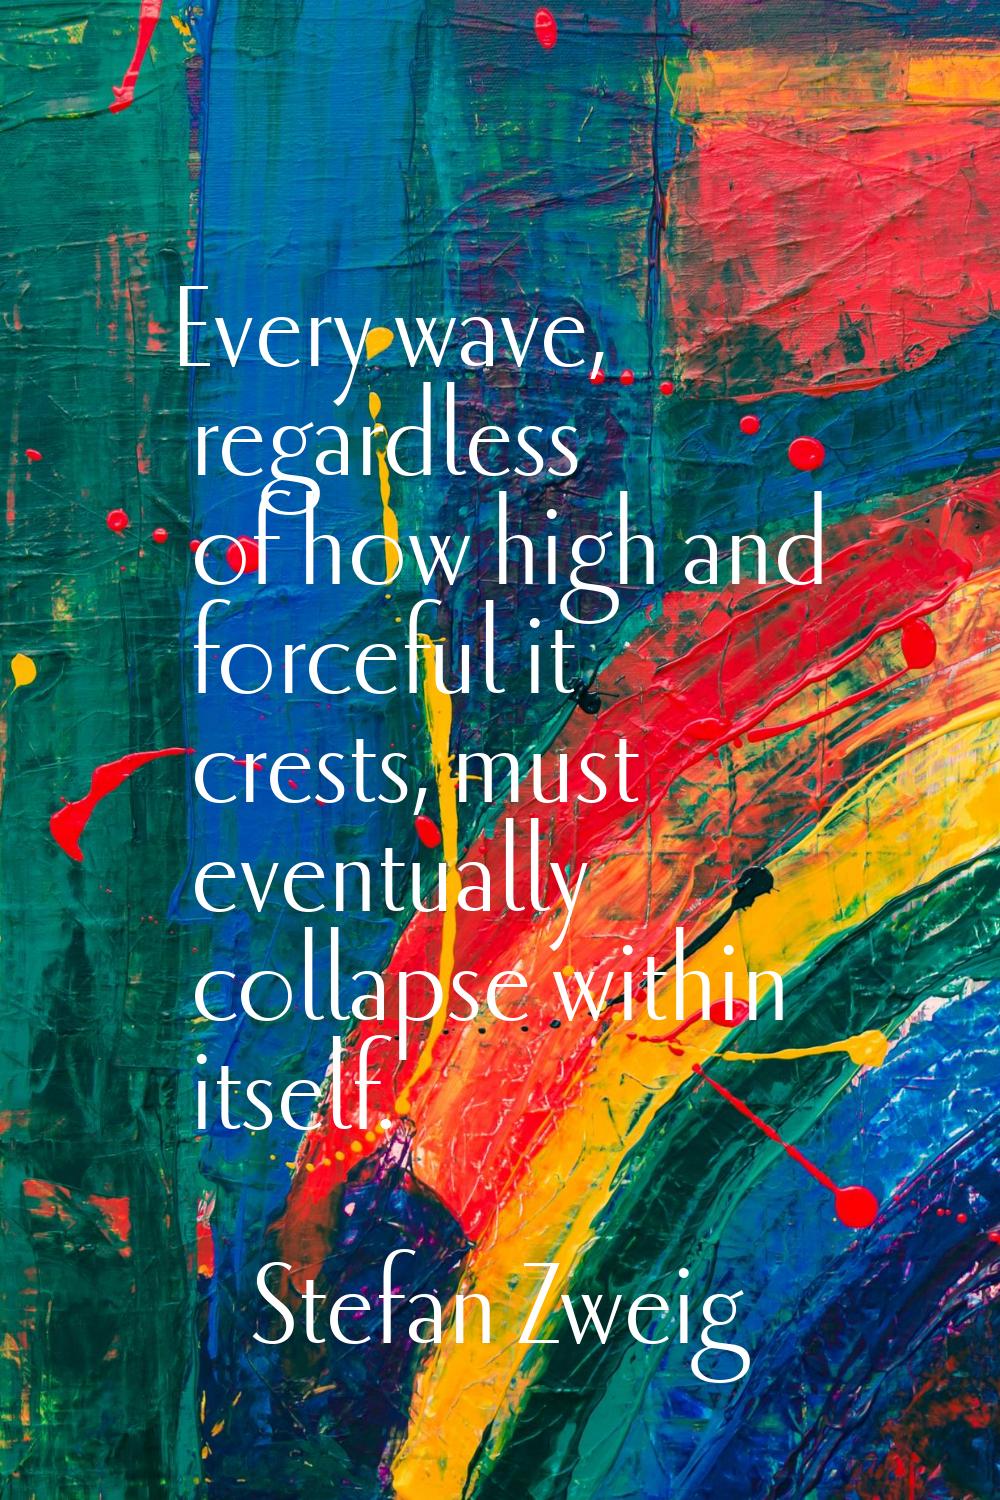 Every wave, regardless of how high and forceful it crests, must eventually collapse within itself.